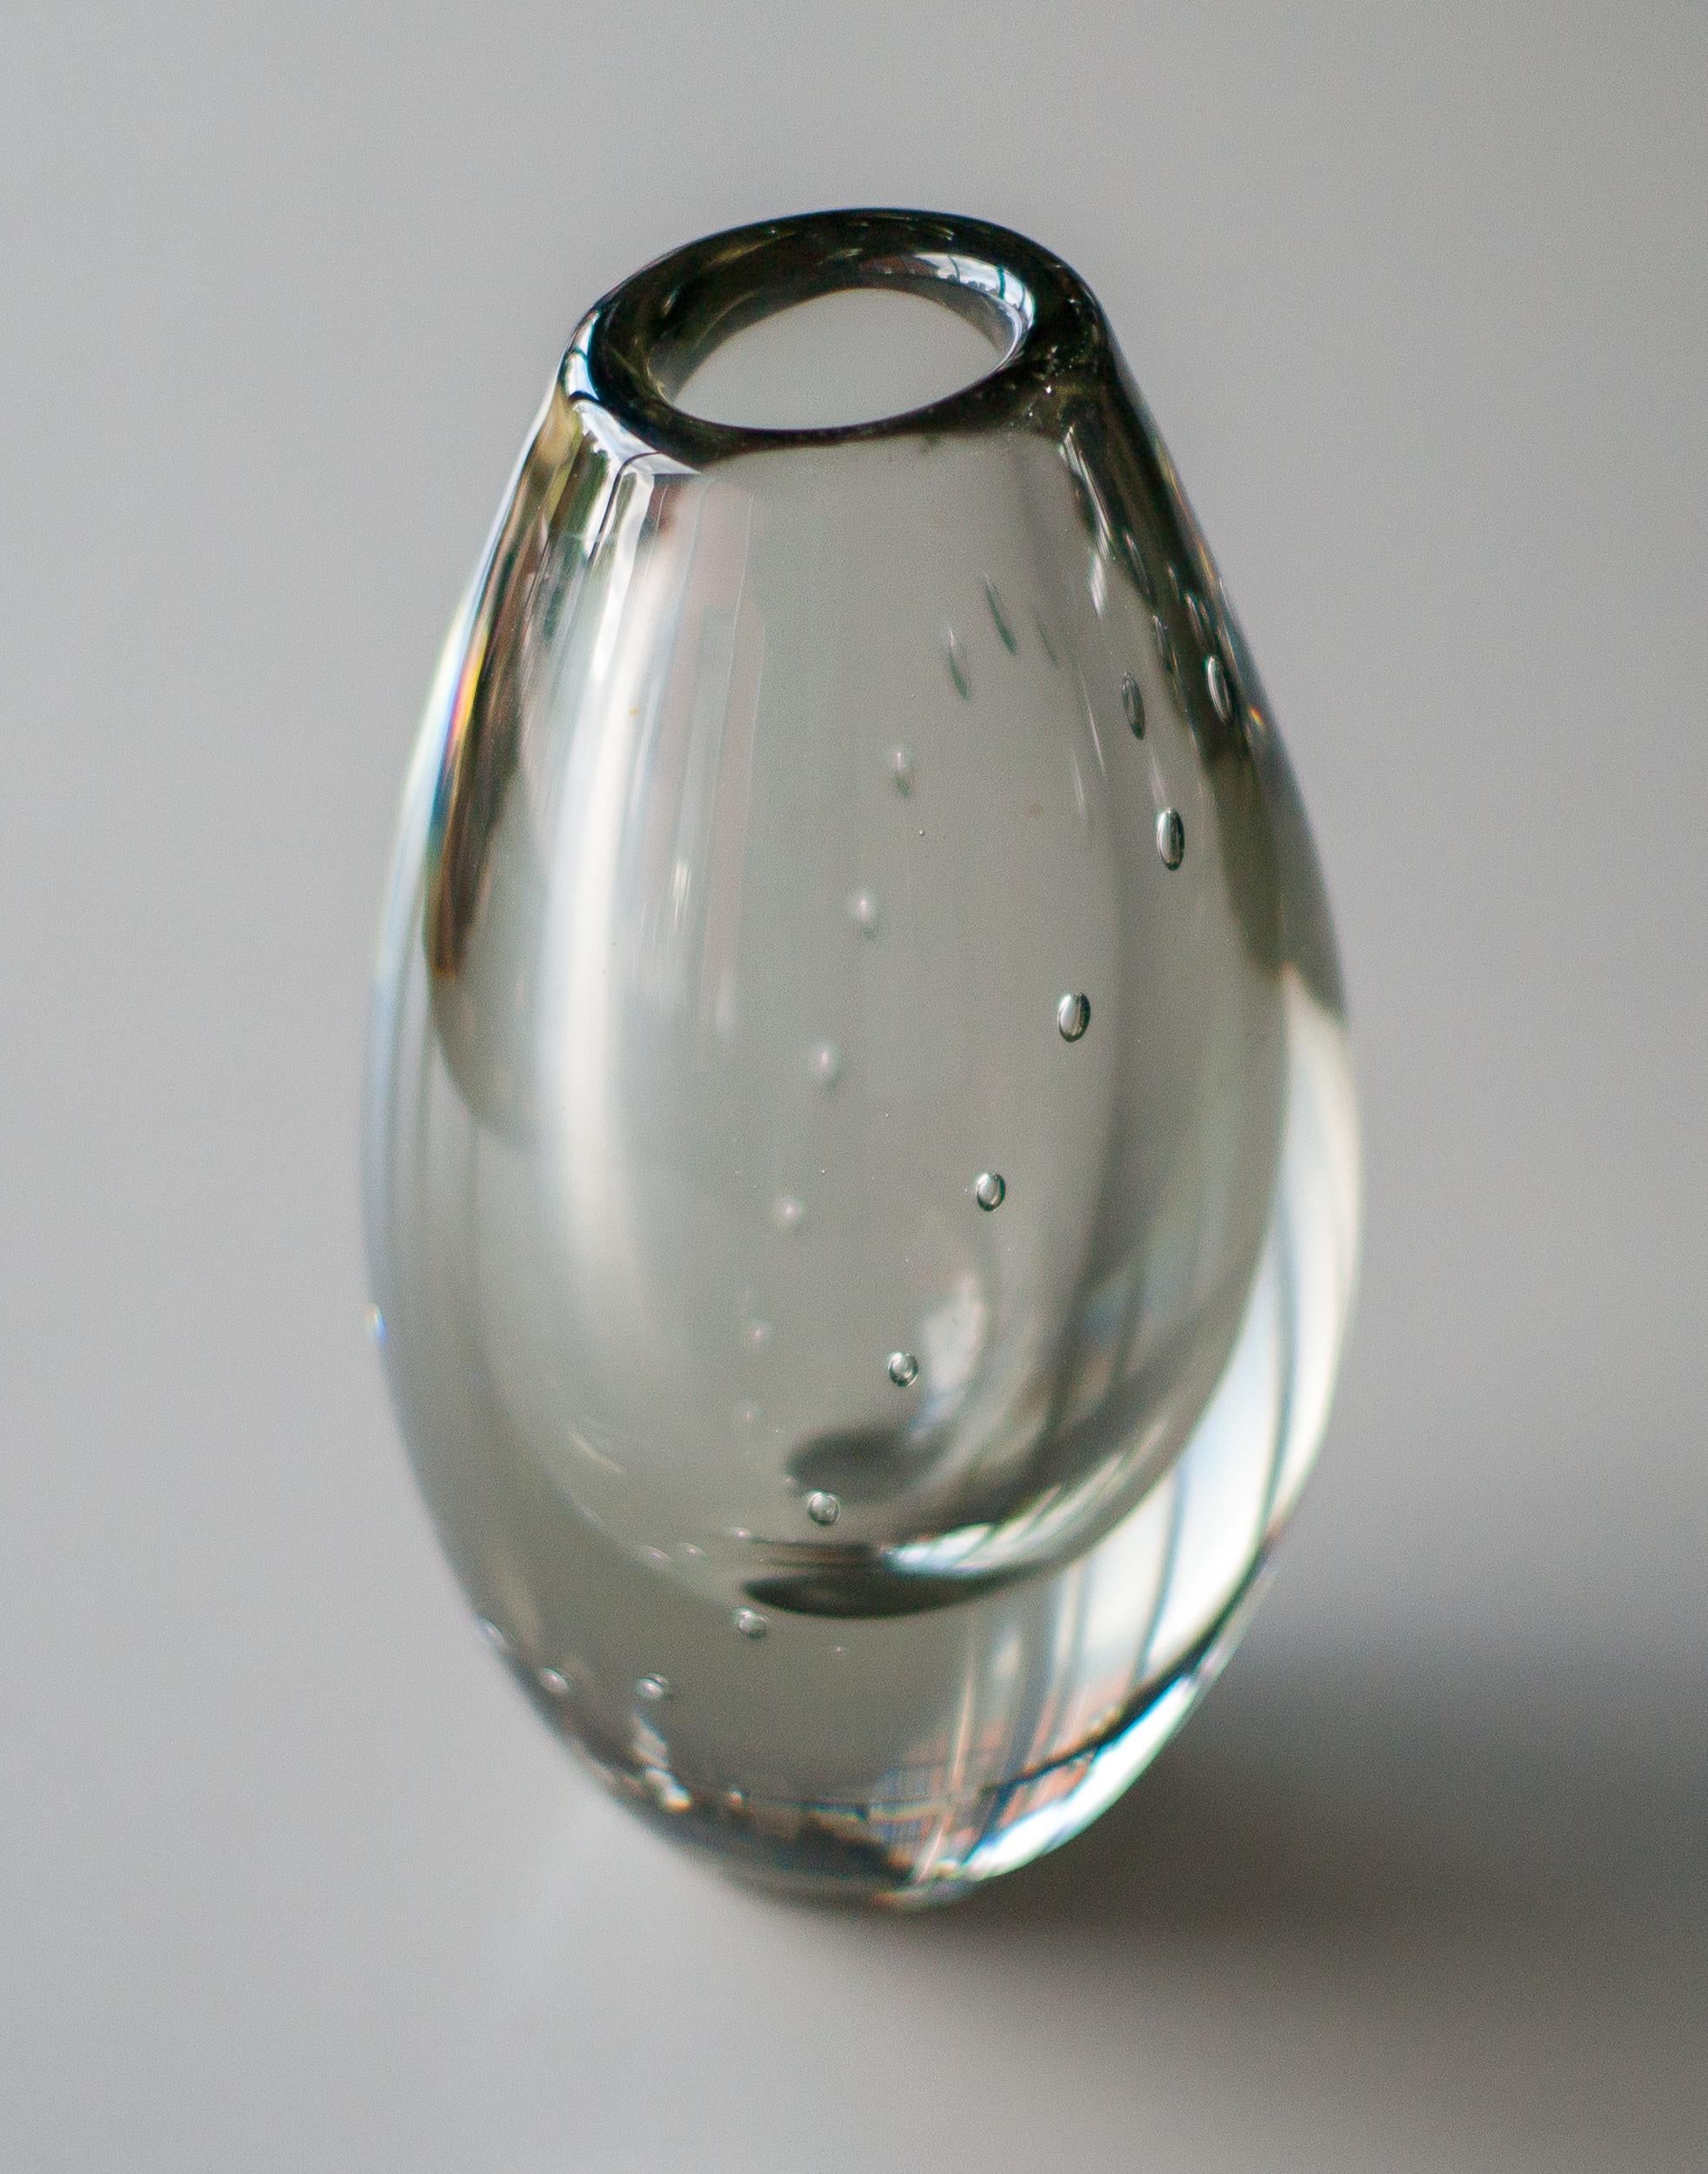 Rare pearl necklace vase designed by Gunnel Nyman for Nuutajärv, Finland.
Provenance: The collection of the former Finnish Honorary Consul General in the Netherlands.
 
Gunnel Nyman was a renowned Finnish glass artist whose talent and creativity